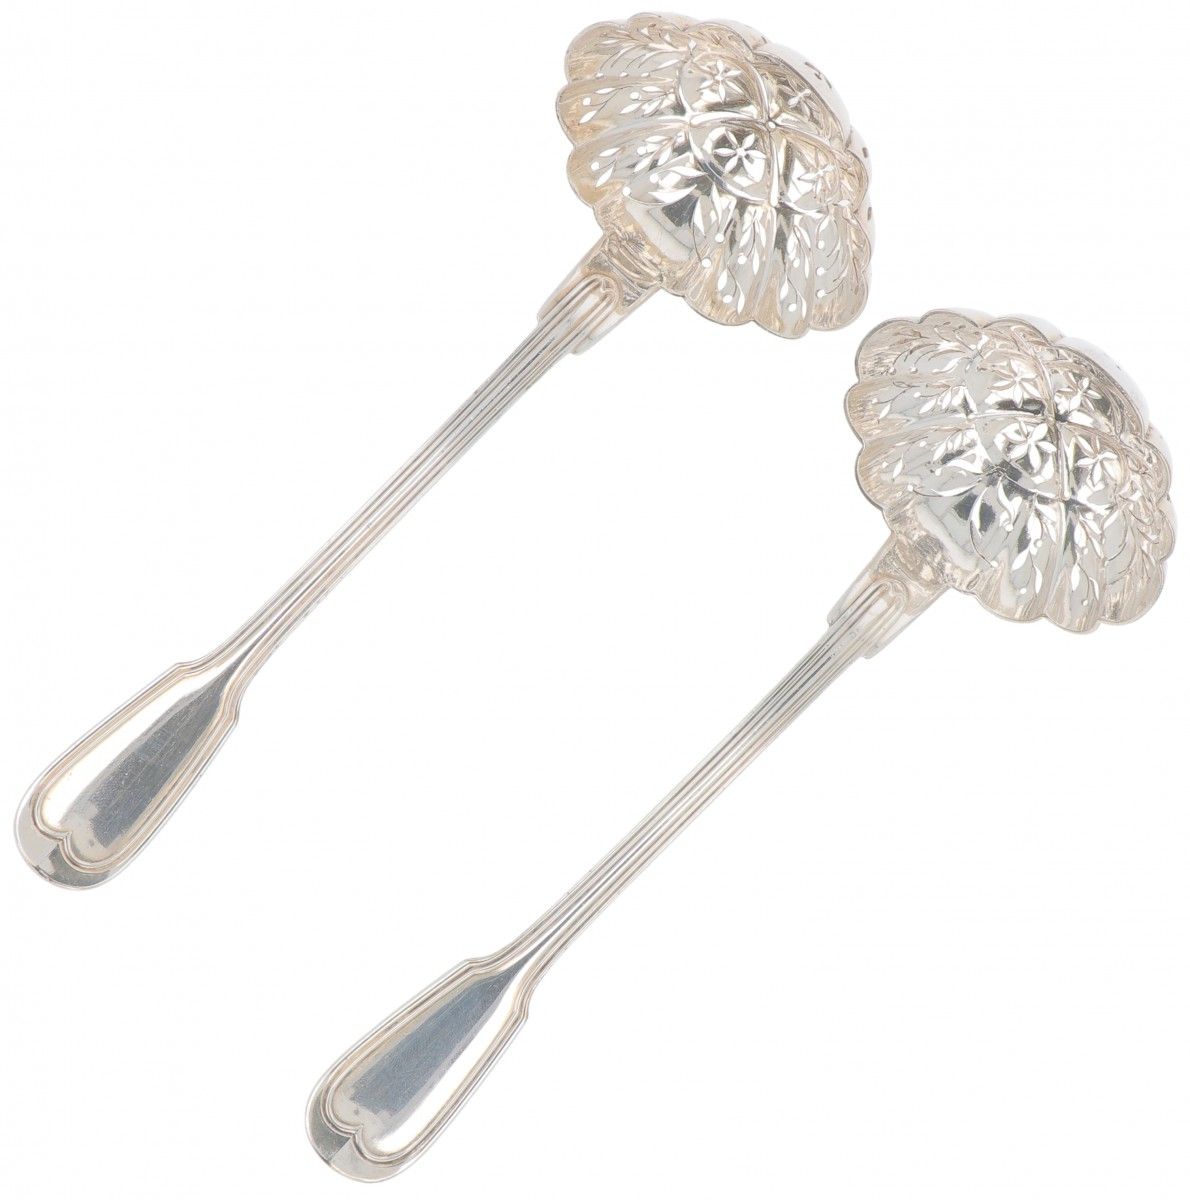 (2) piece set sprinkler spoons, Christofle "Chinon", silver-plated. 型号为 "Chinon &hellip;